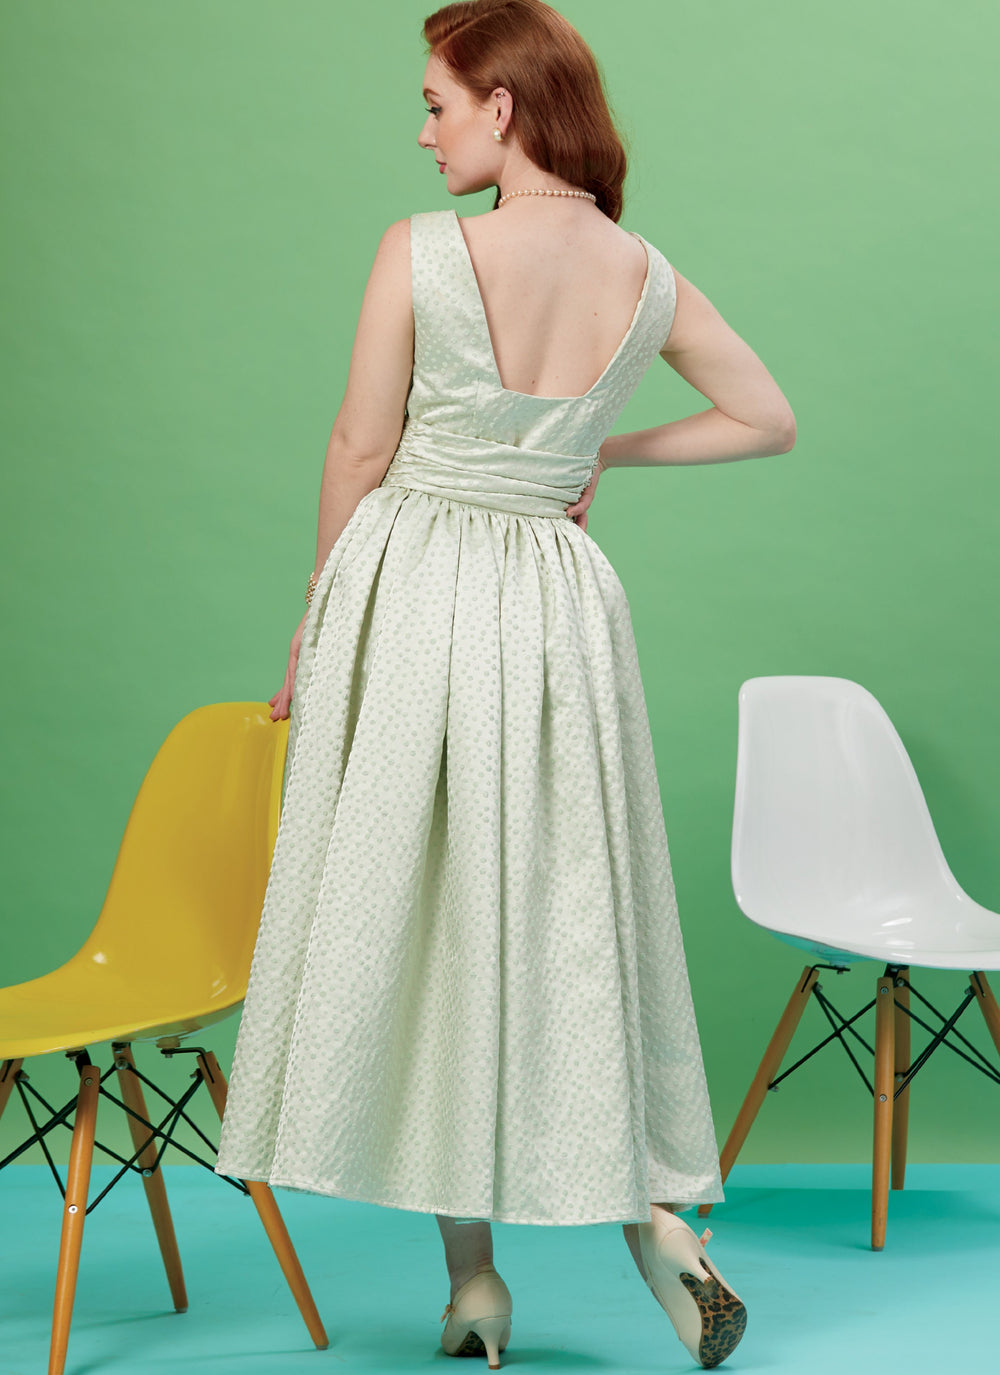 M7897 Misses' Dresses | The Archive Collection from Jaycotts Sewing Supplies